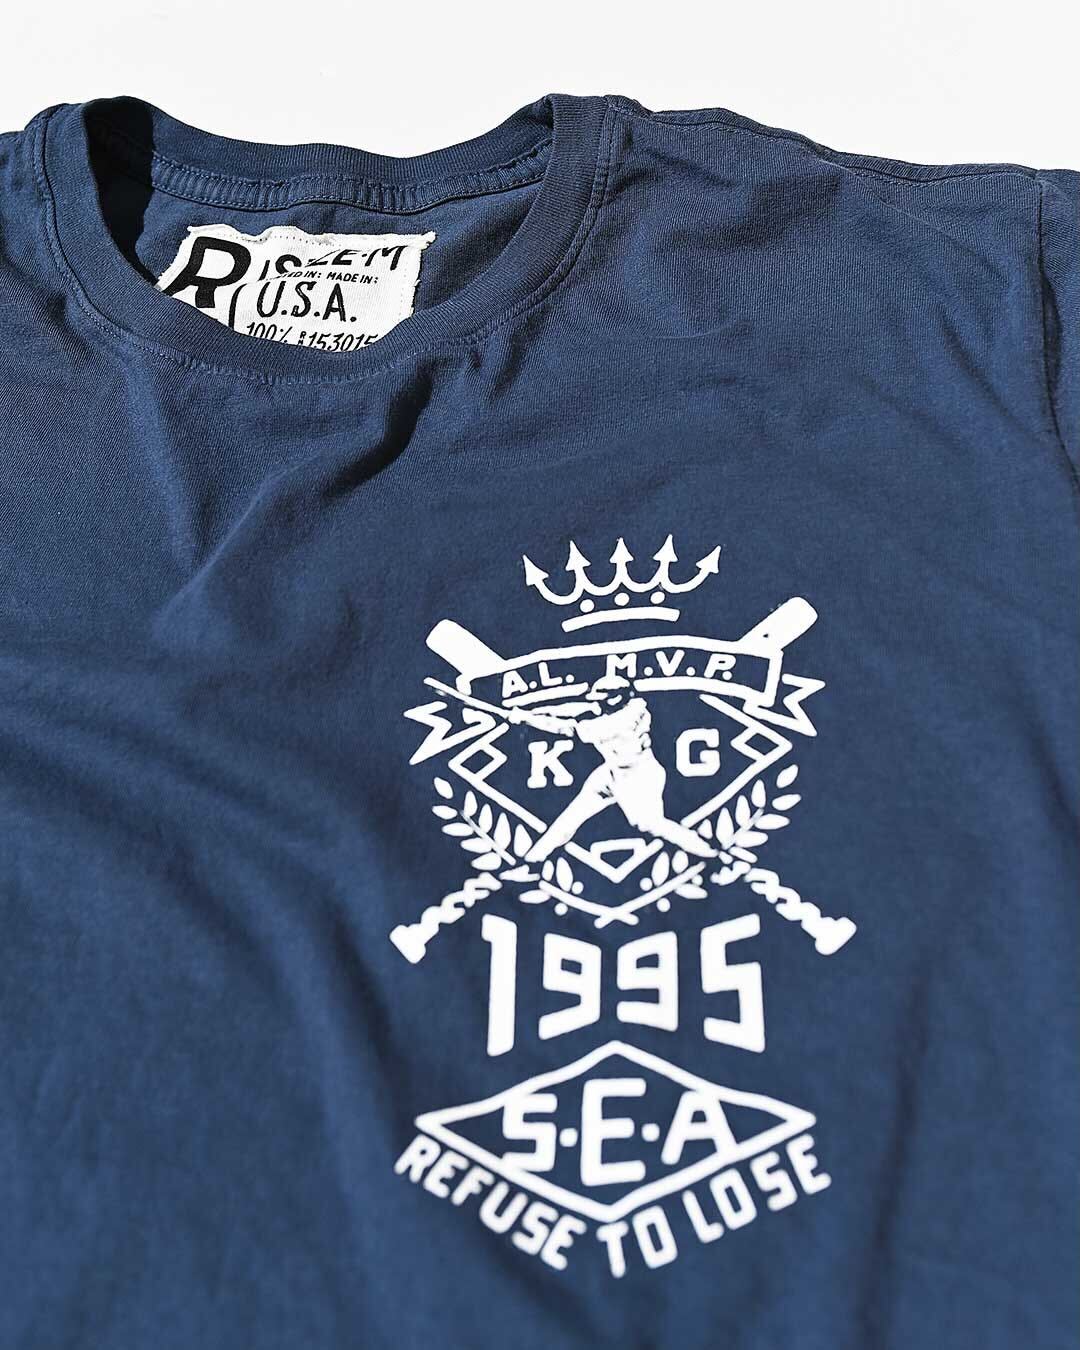 Griffey 1995 Refuse to Lose Navy Tee - Roots of Fight